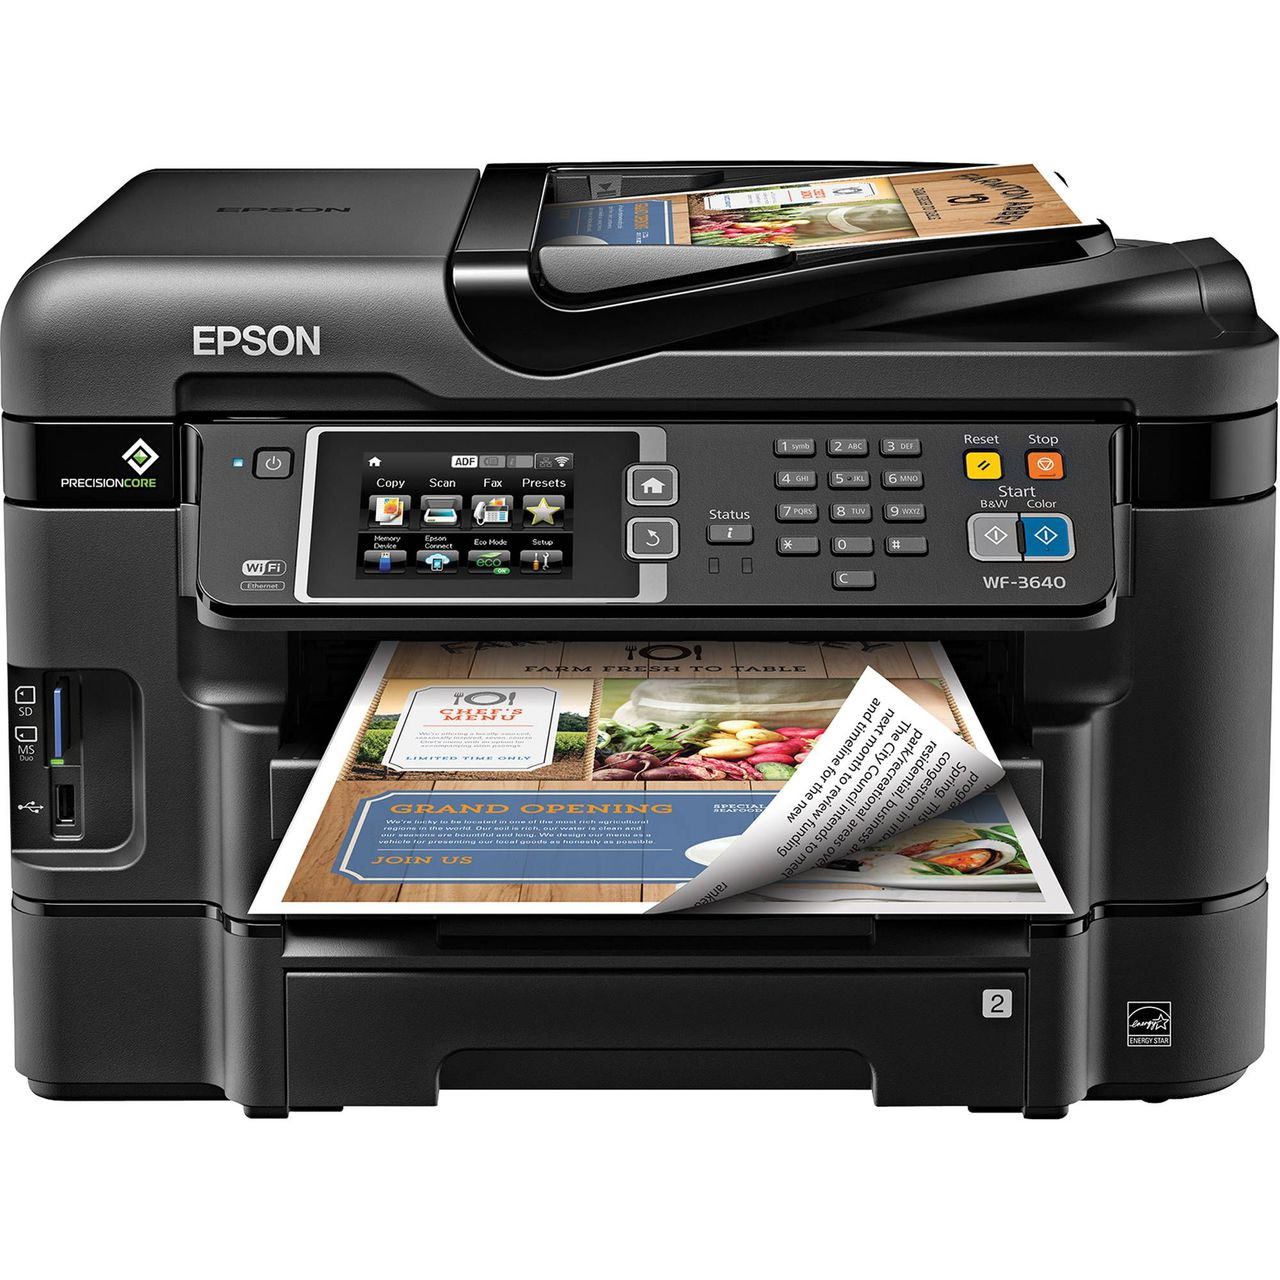 Epson Workforce Wf 2650 All In One Wireless Color Printer With Scanner Copier And Fax 4111